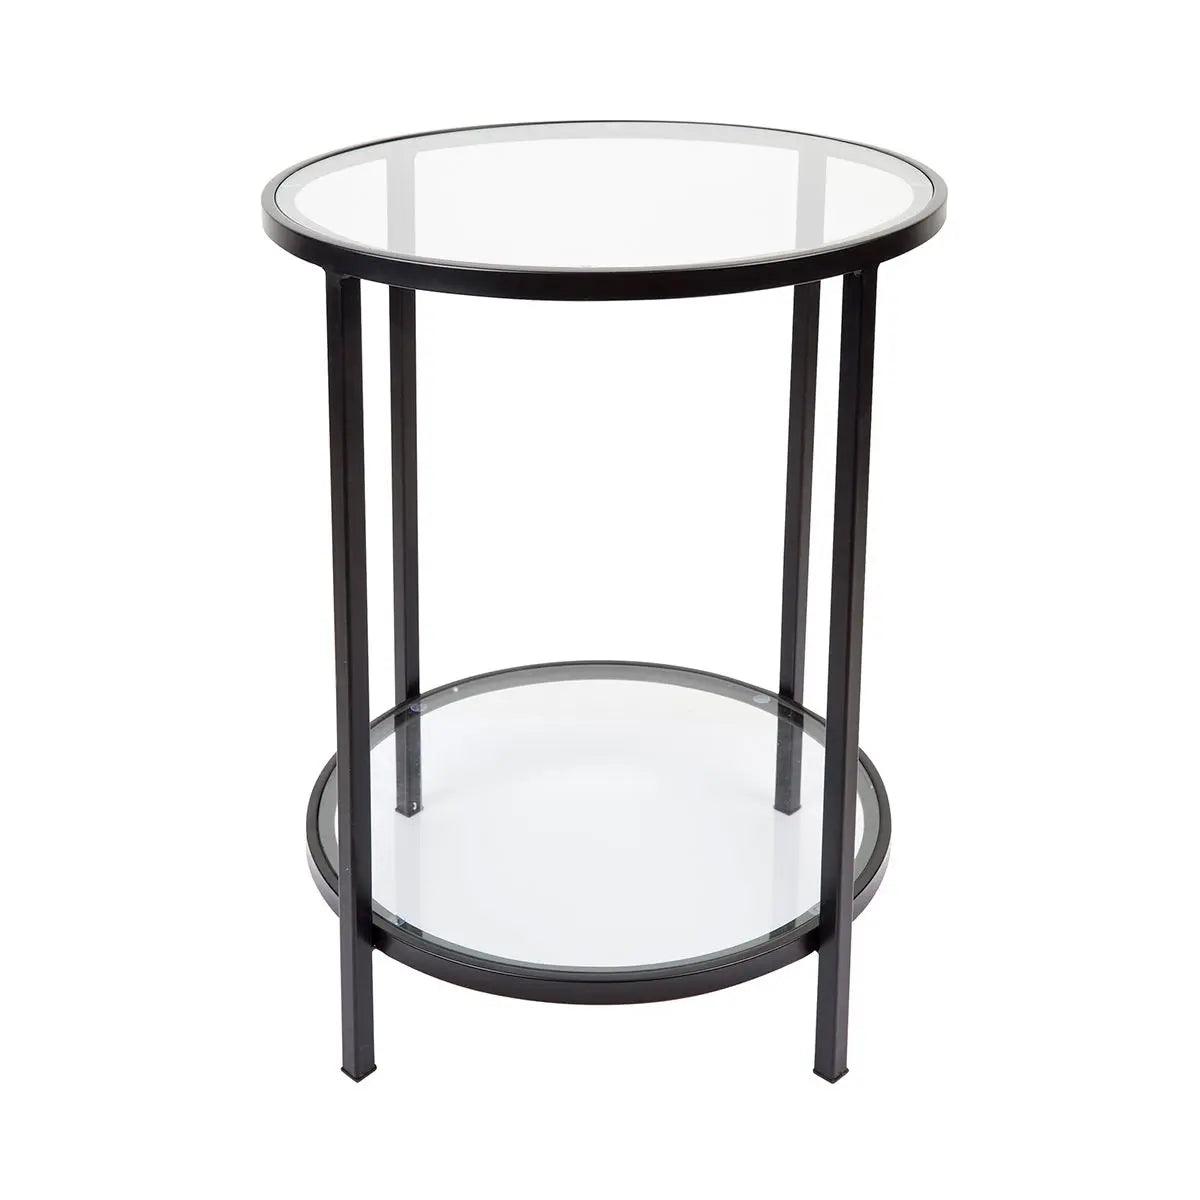 Cafe Lighting & Living Cocktail Glass Round Side Table - Black - Side Table324139320294117460 1